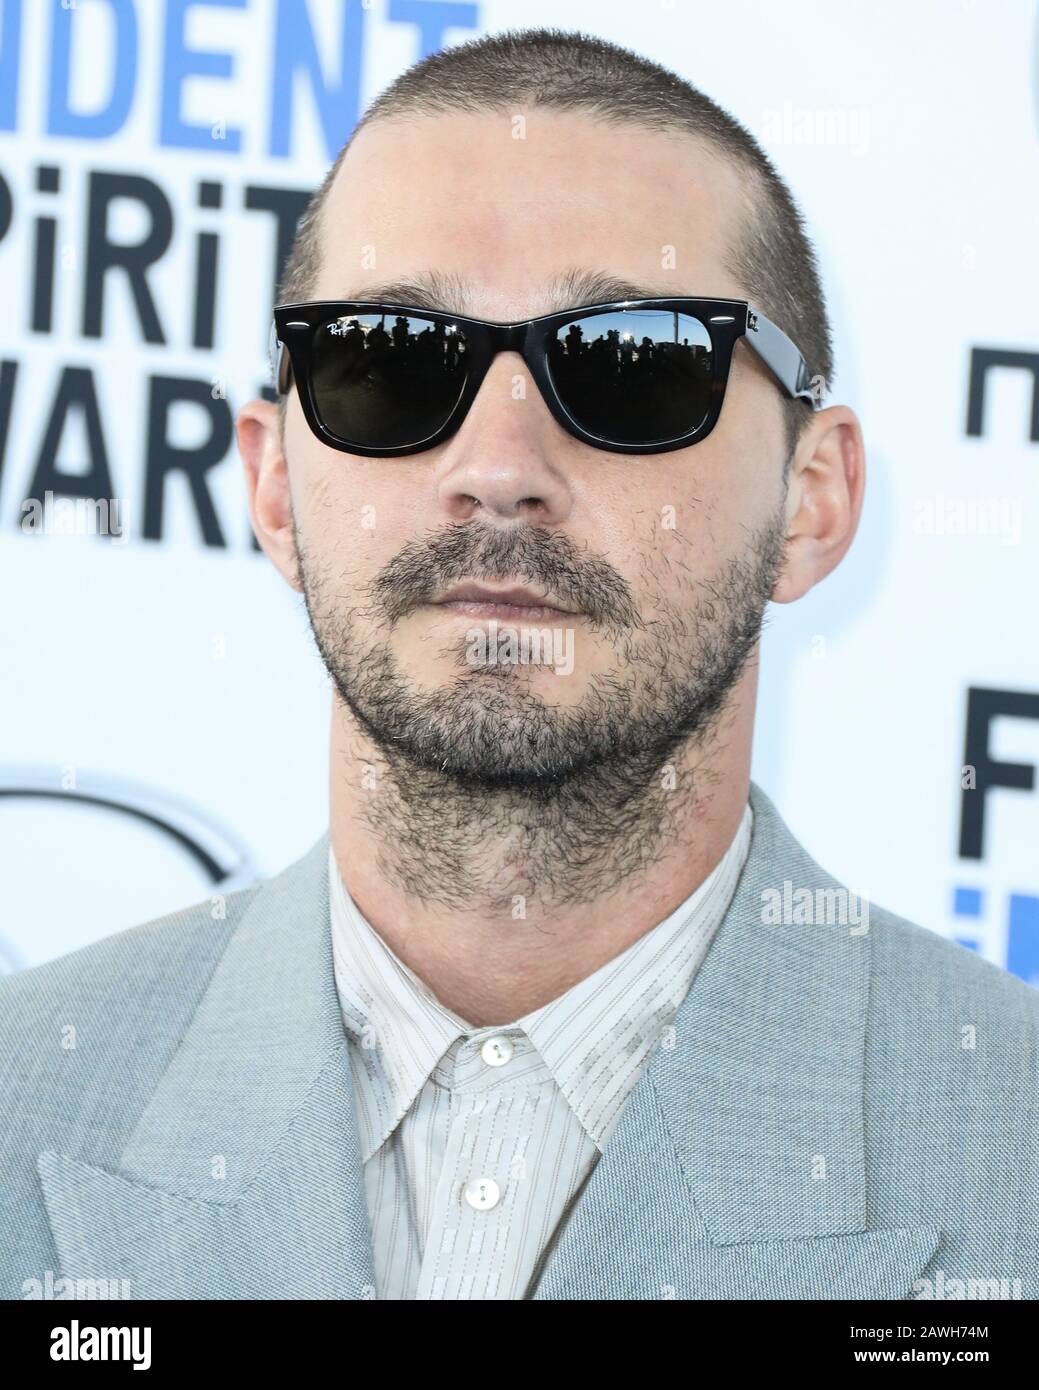 SANTA MONICA, LOS ANGELES, CALIFORNIA, USA - FEBRUARY 08: Actor Shia  LaBeouf wearing Gucci with Ray-Ban sunglasses arrives at the 2020 Film  Independent Spirit Awards held at the Santa Monica Beach on